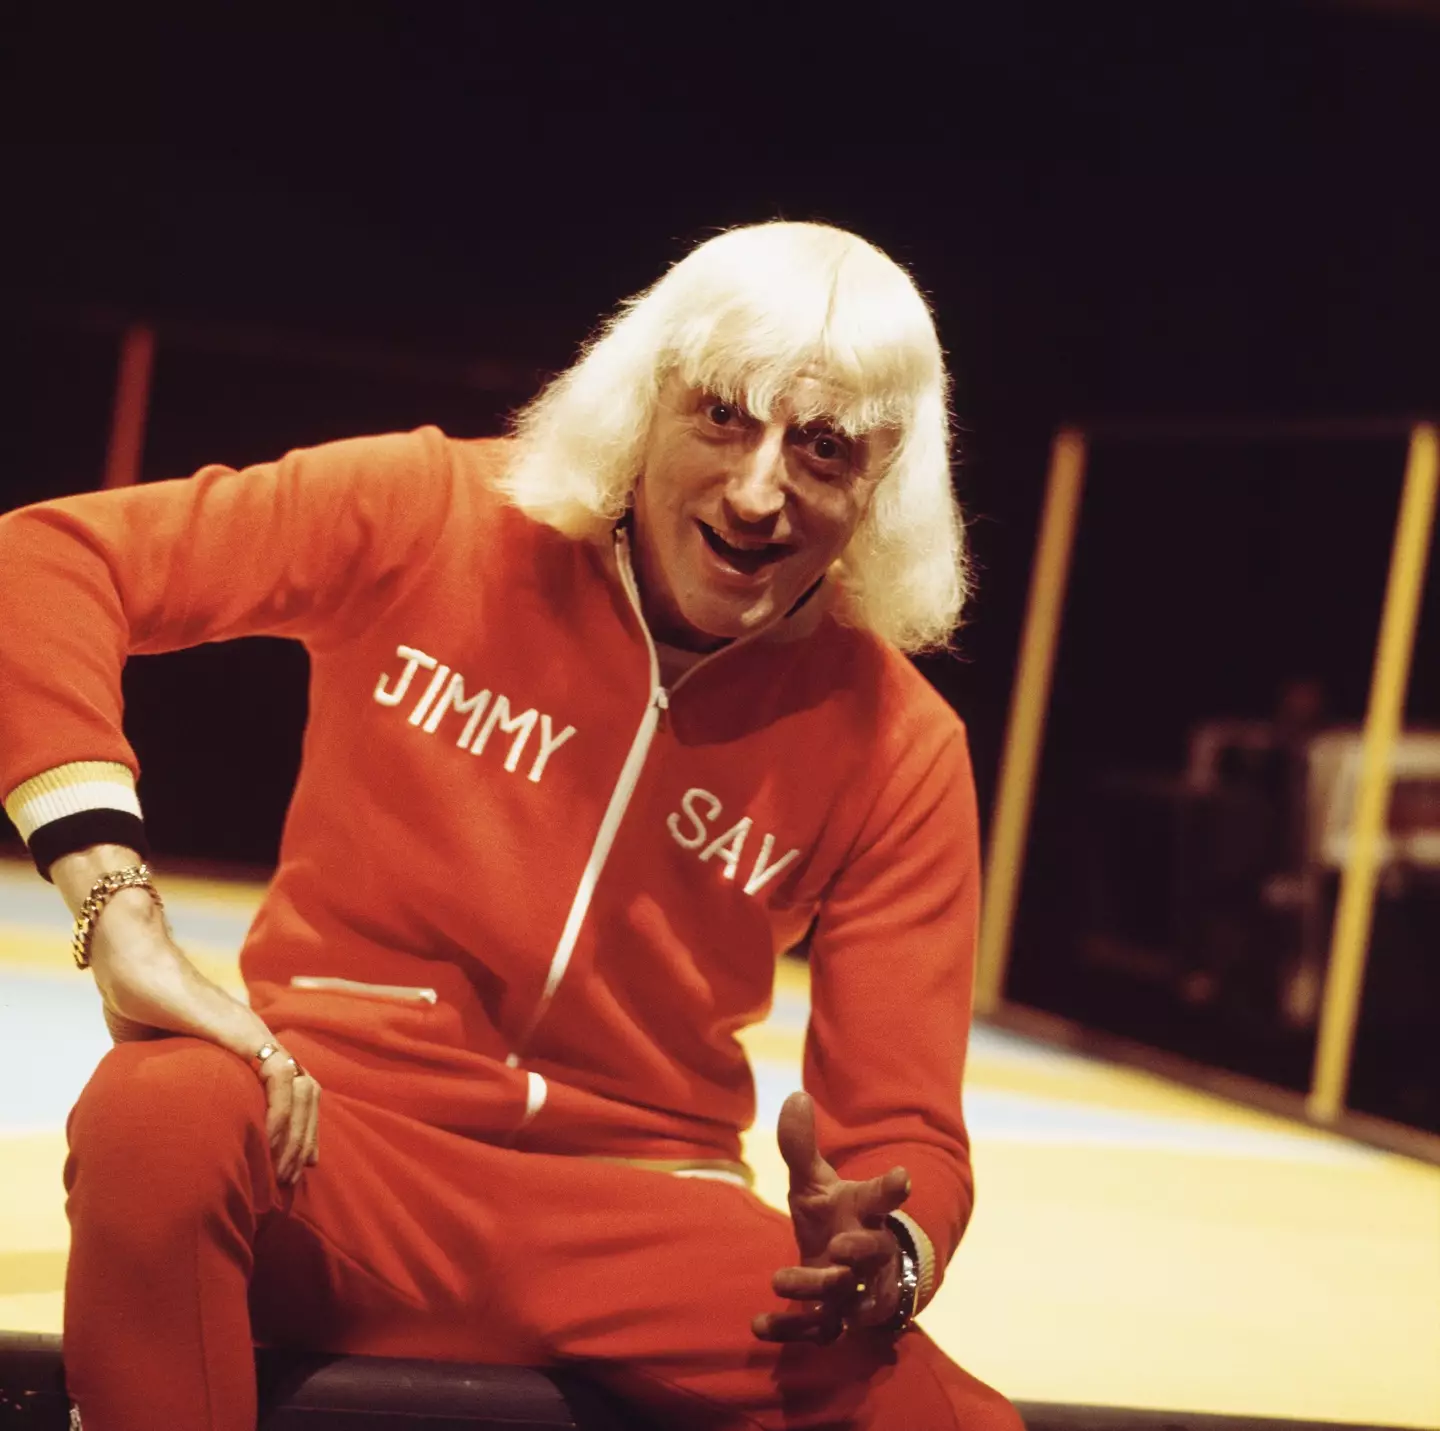 Jimmy Savile was never brought to justice before his death.